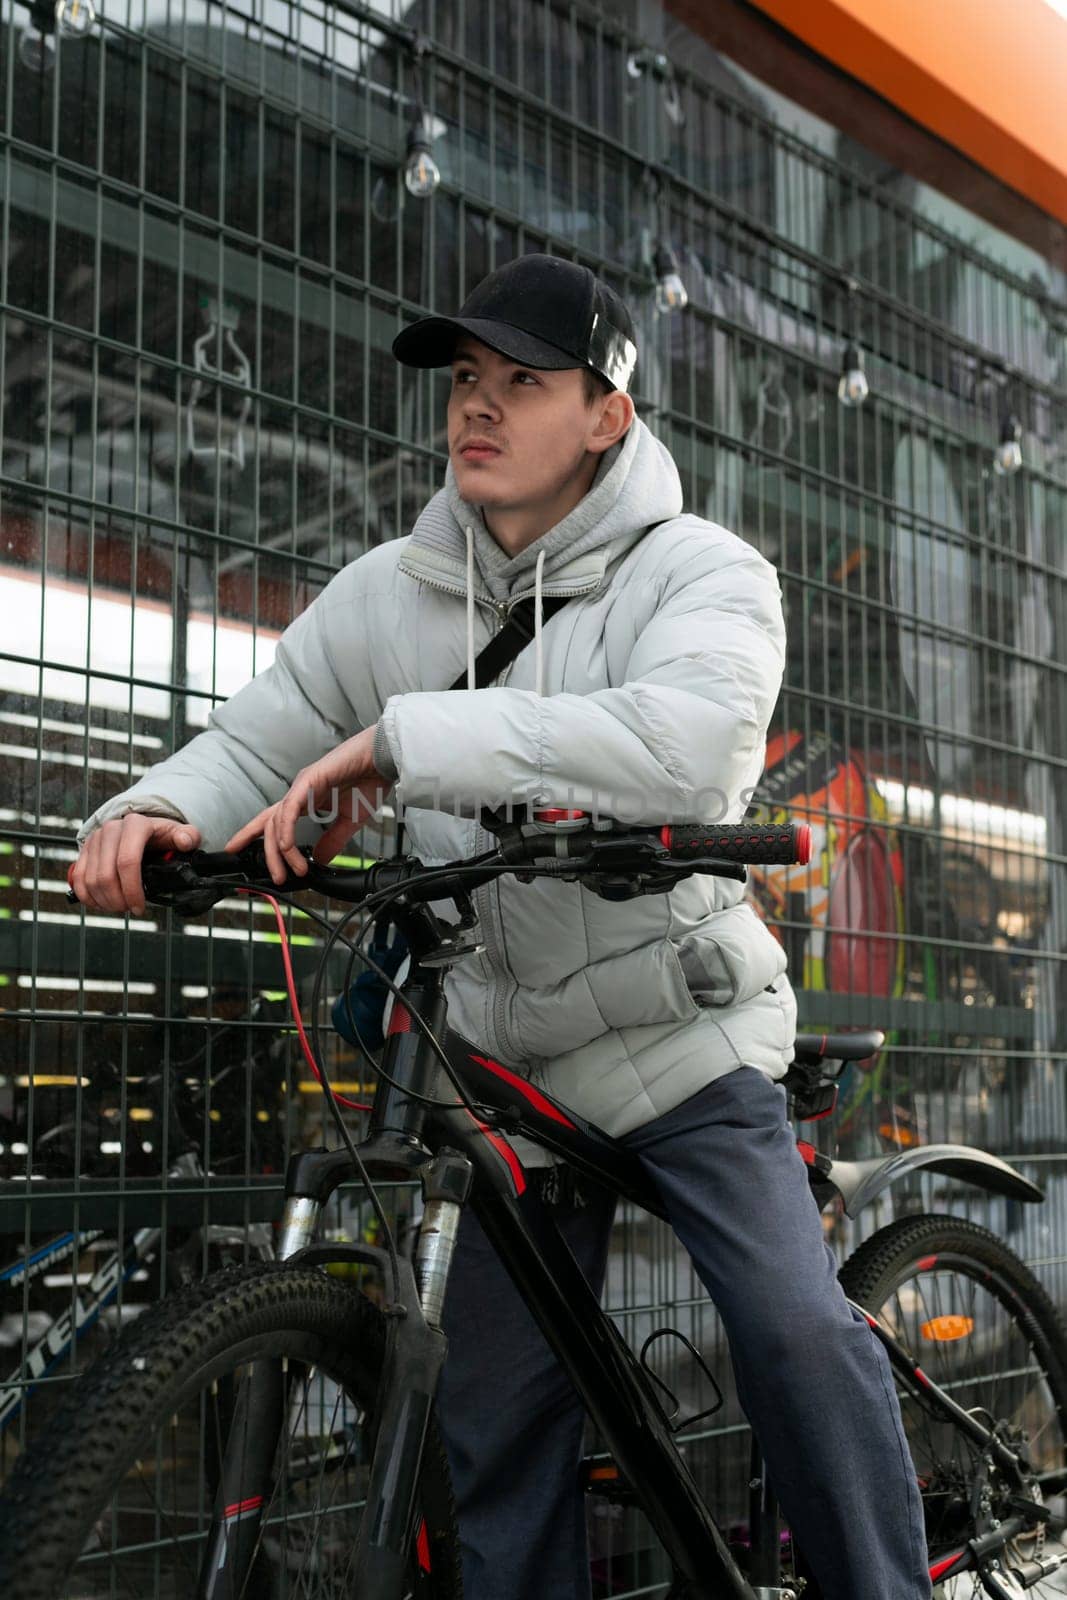 A man in a cap rented a bicycle.